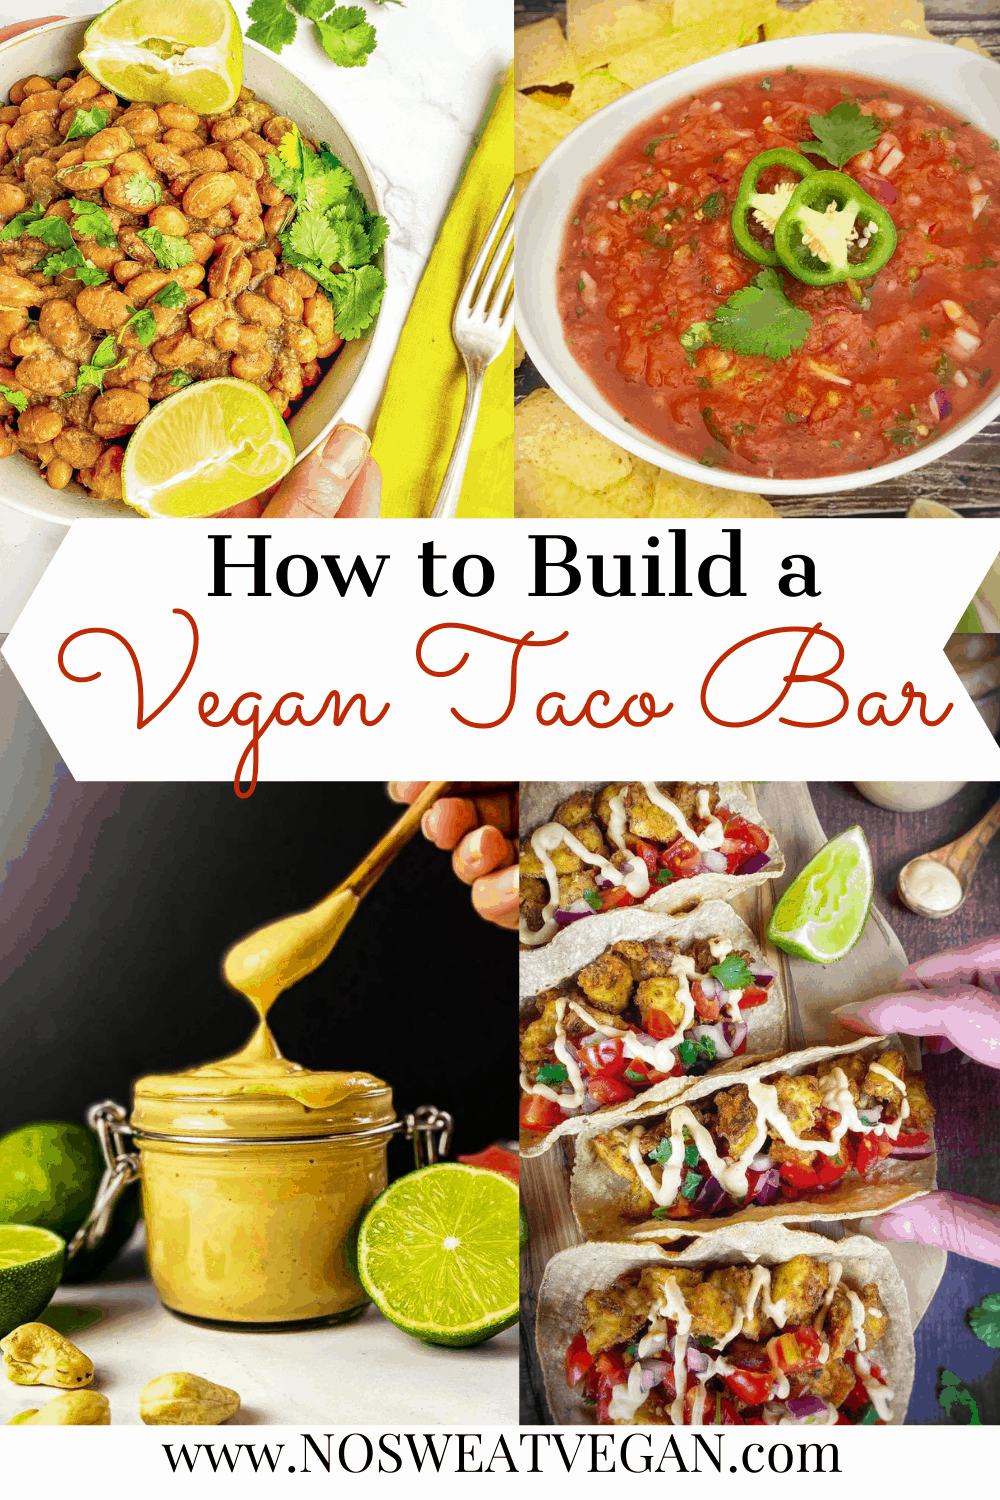 How to build a vegan taco bar collage: pinto beans, salsa, chipotle mayo, and vegan tacos.